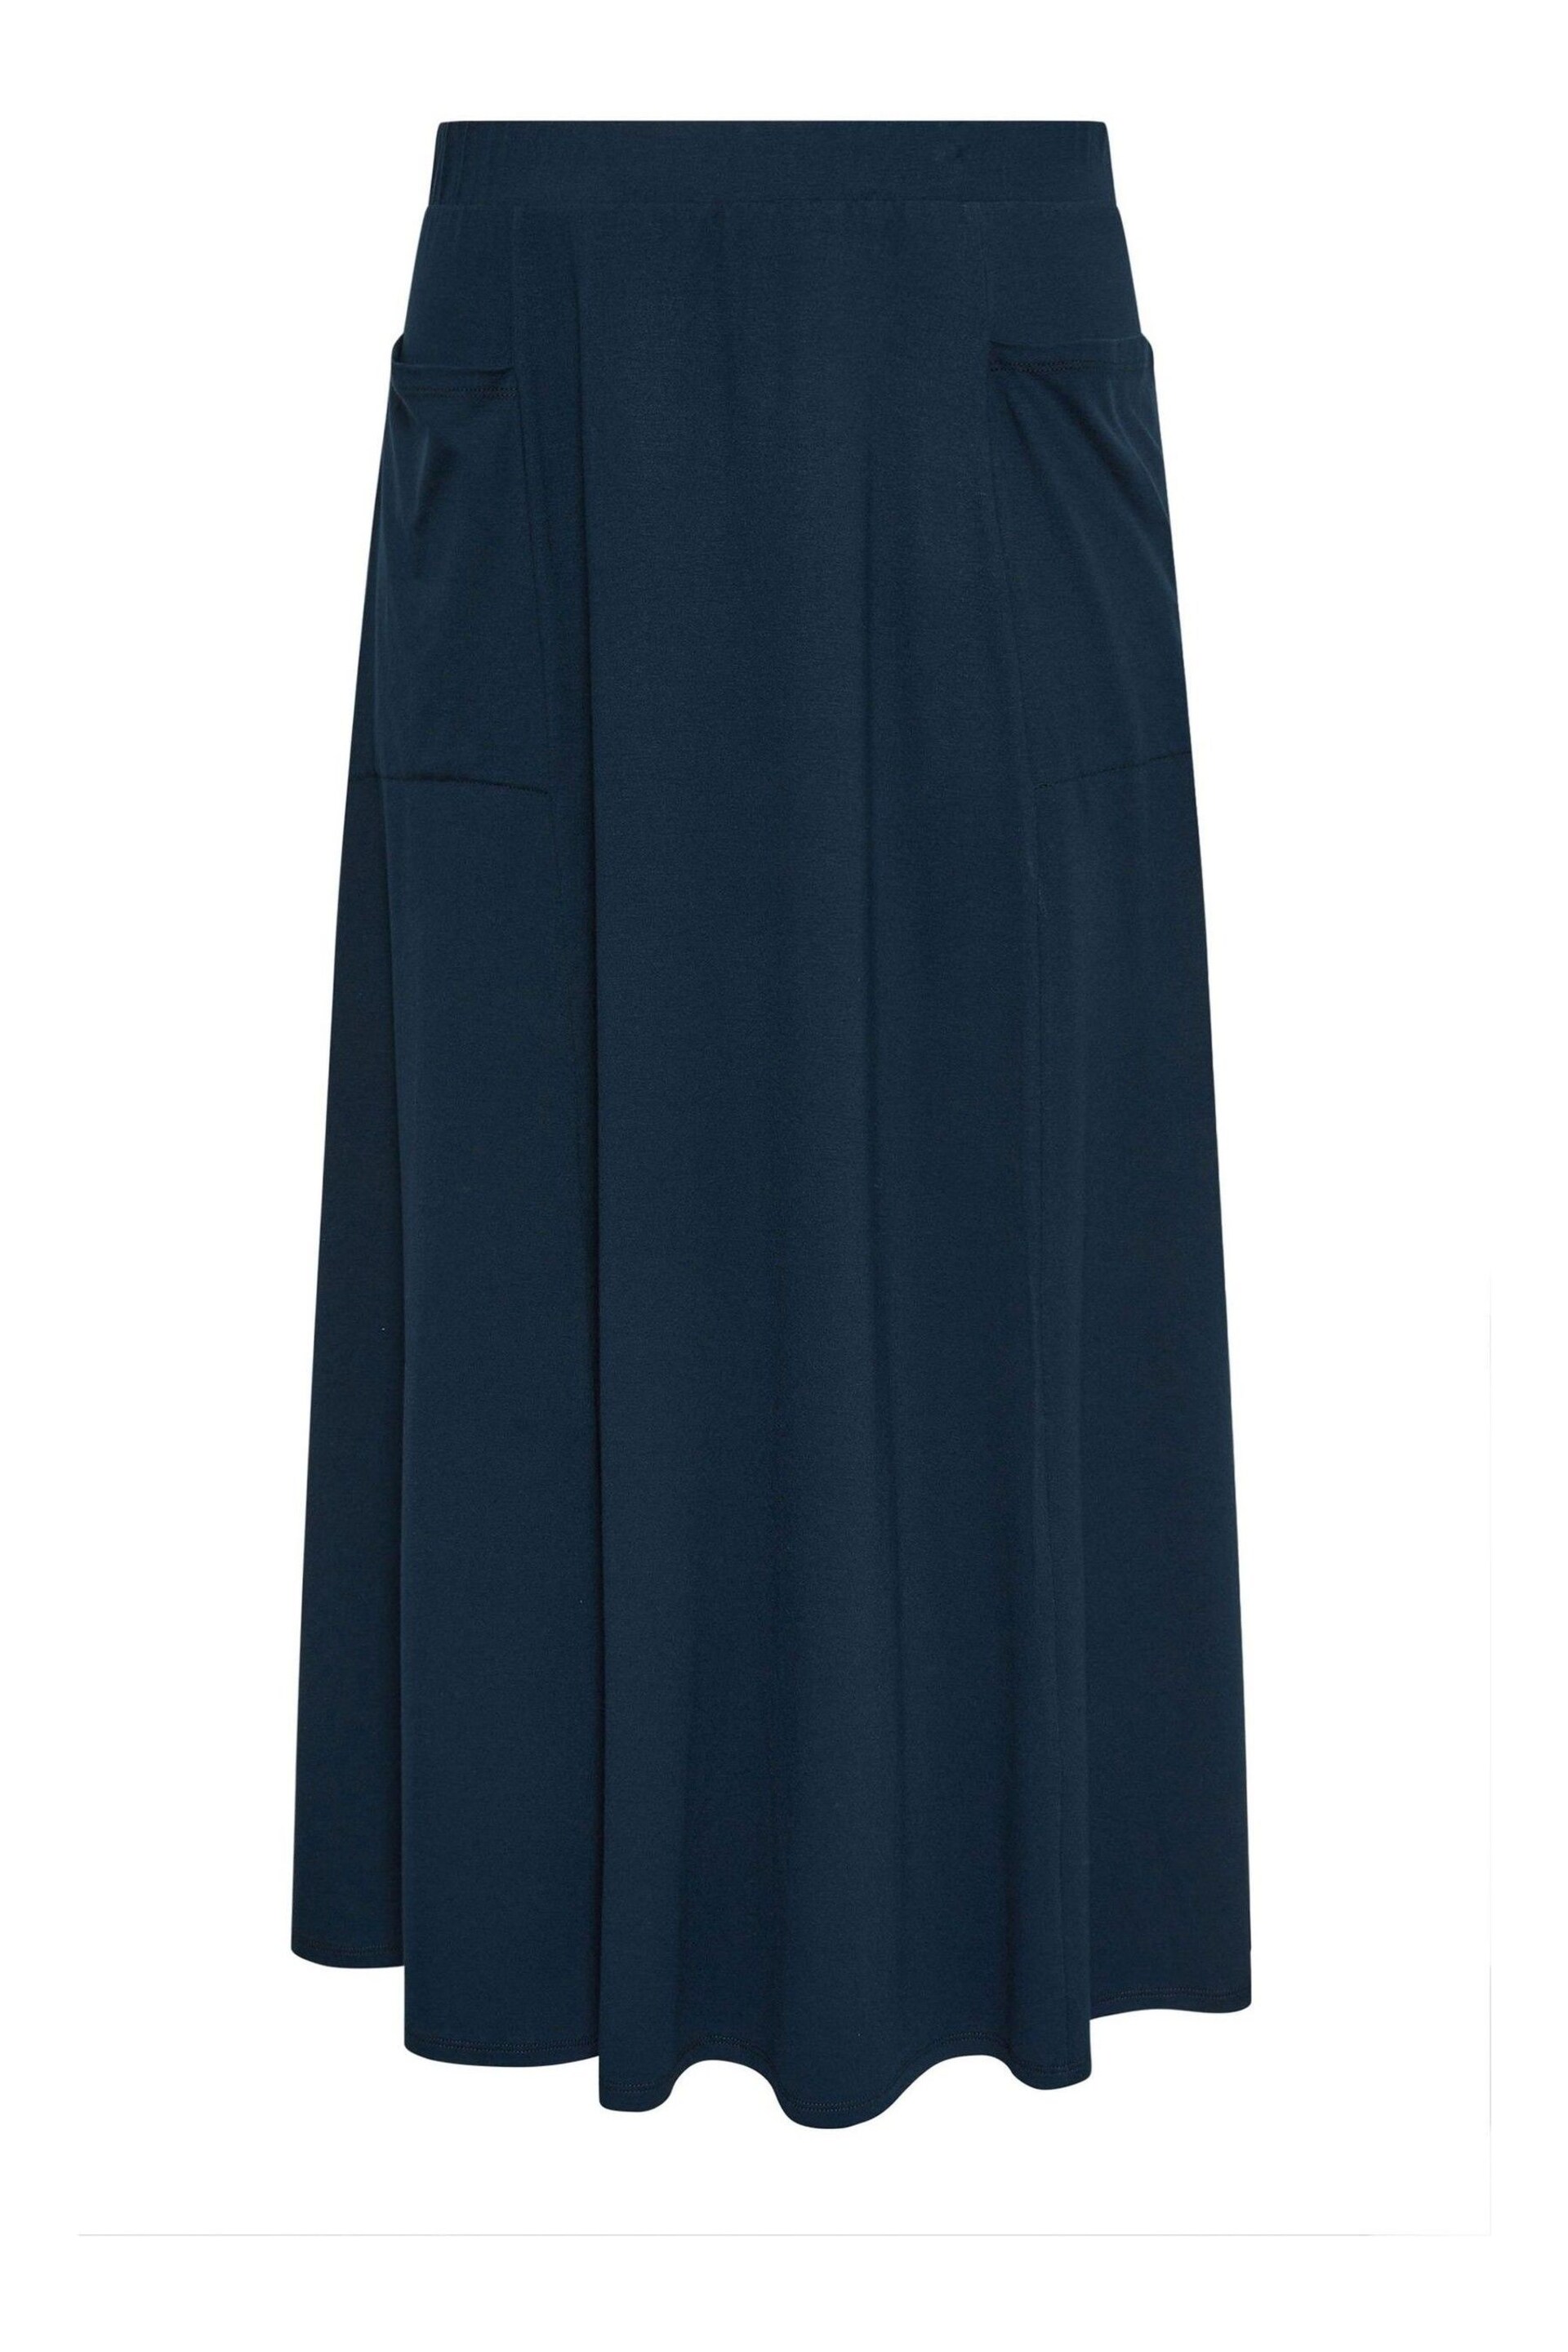 Evans Curve Maxi Skirt - Image 5 of 5